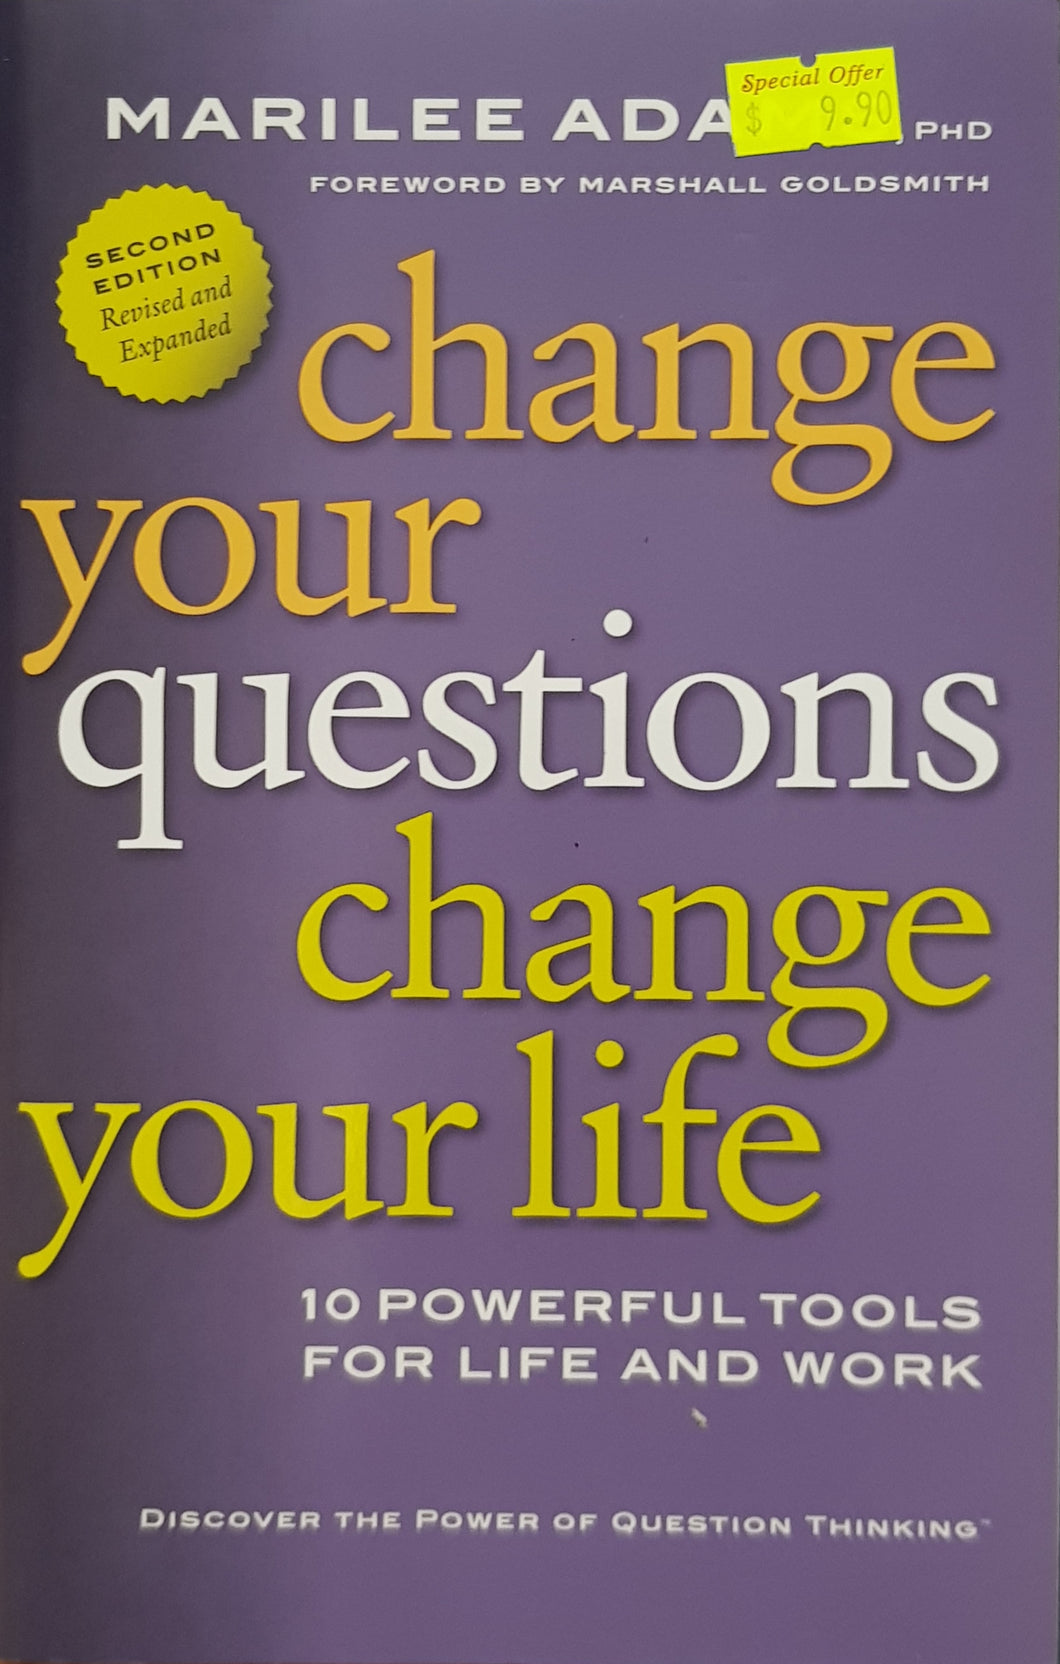 Change Your Questions, Change Your Life - Marilee G. Adams